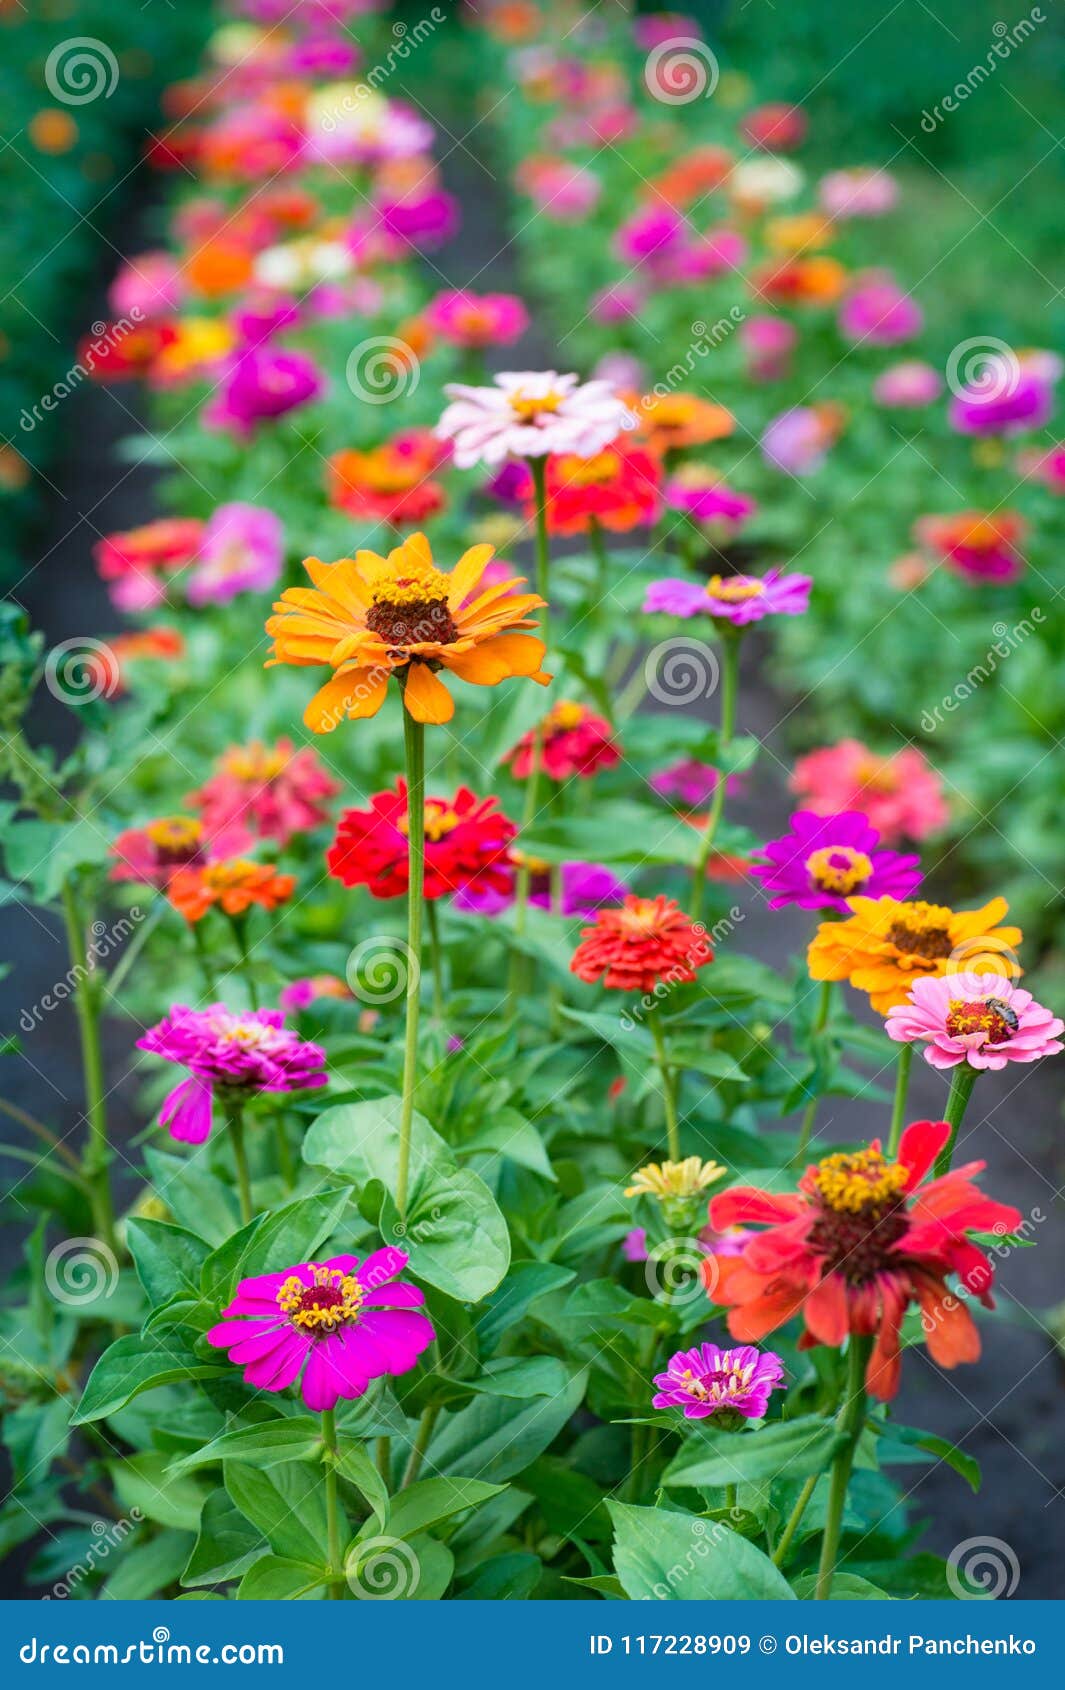 Line Of Beautiful Zinnia Flowers Nature Background Stock Image Image Of Leaf Leaves 117228909